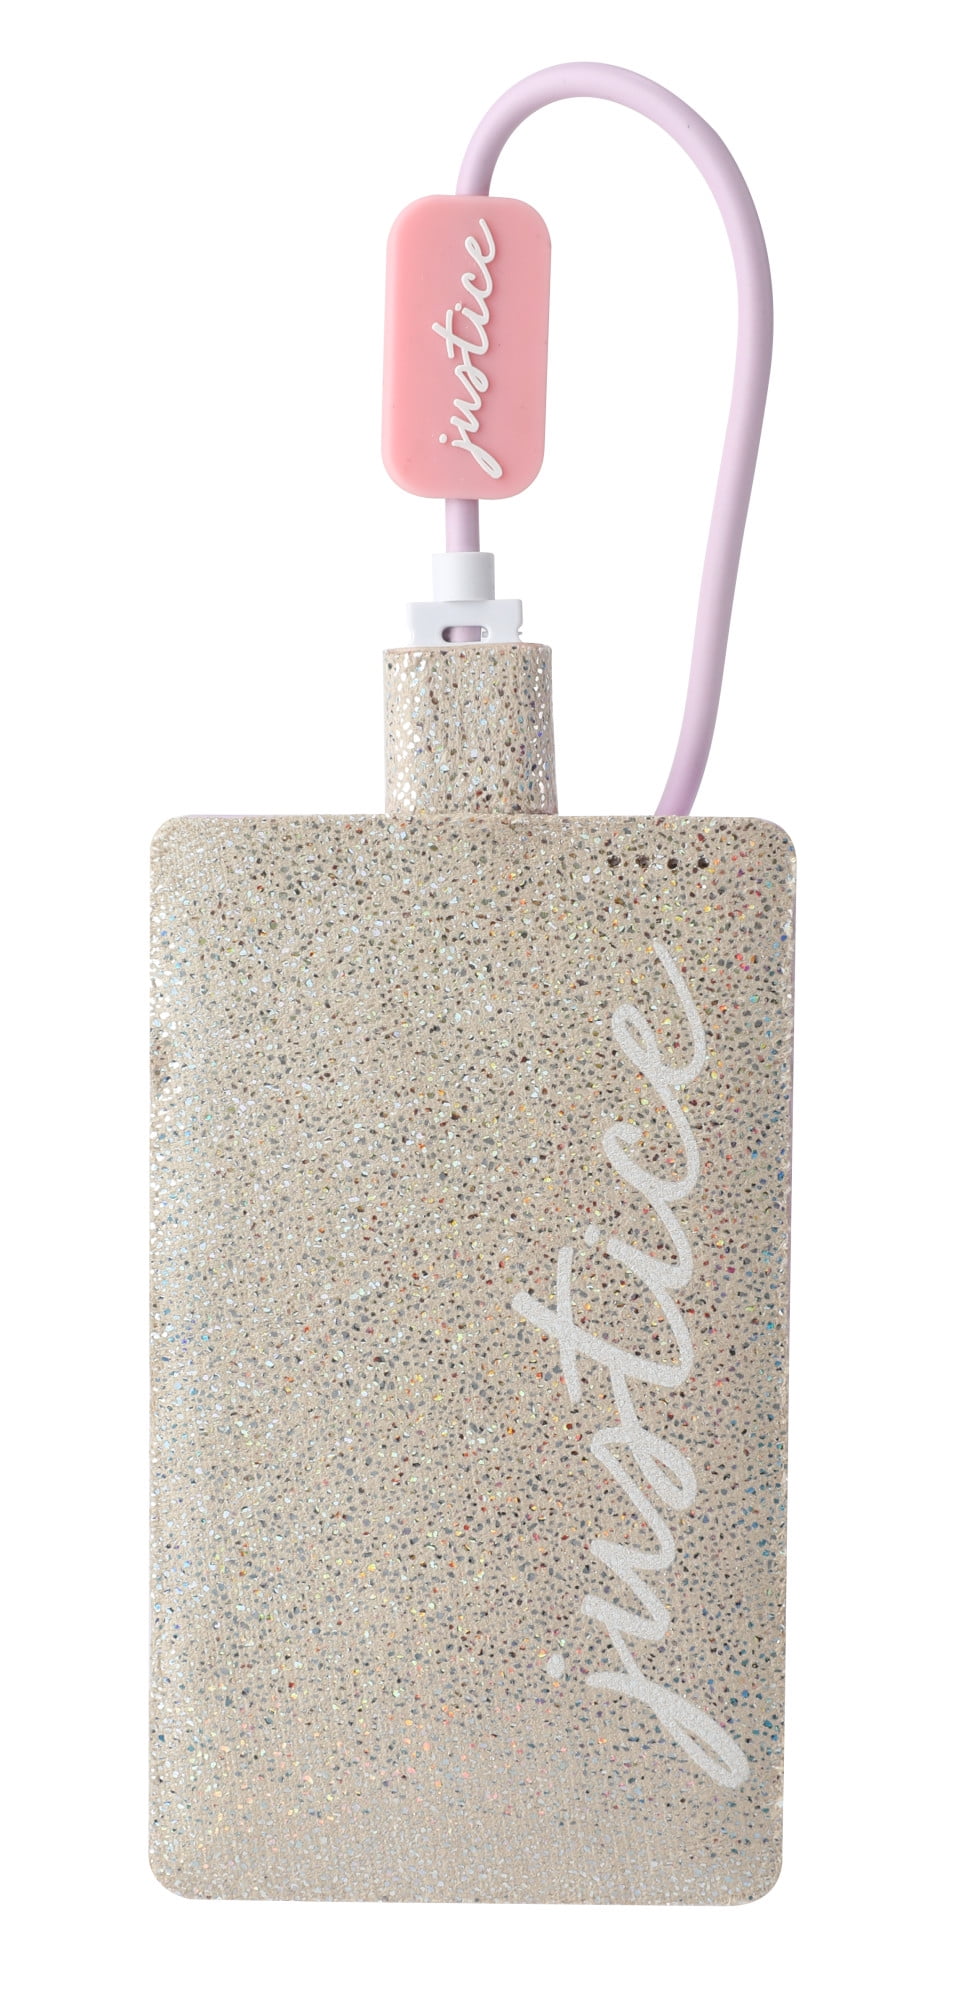 Justice Slim Portable Lightweight Power Bank 4000mAh Works With iPhone and  Android Gold Glitter - Walmart.com